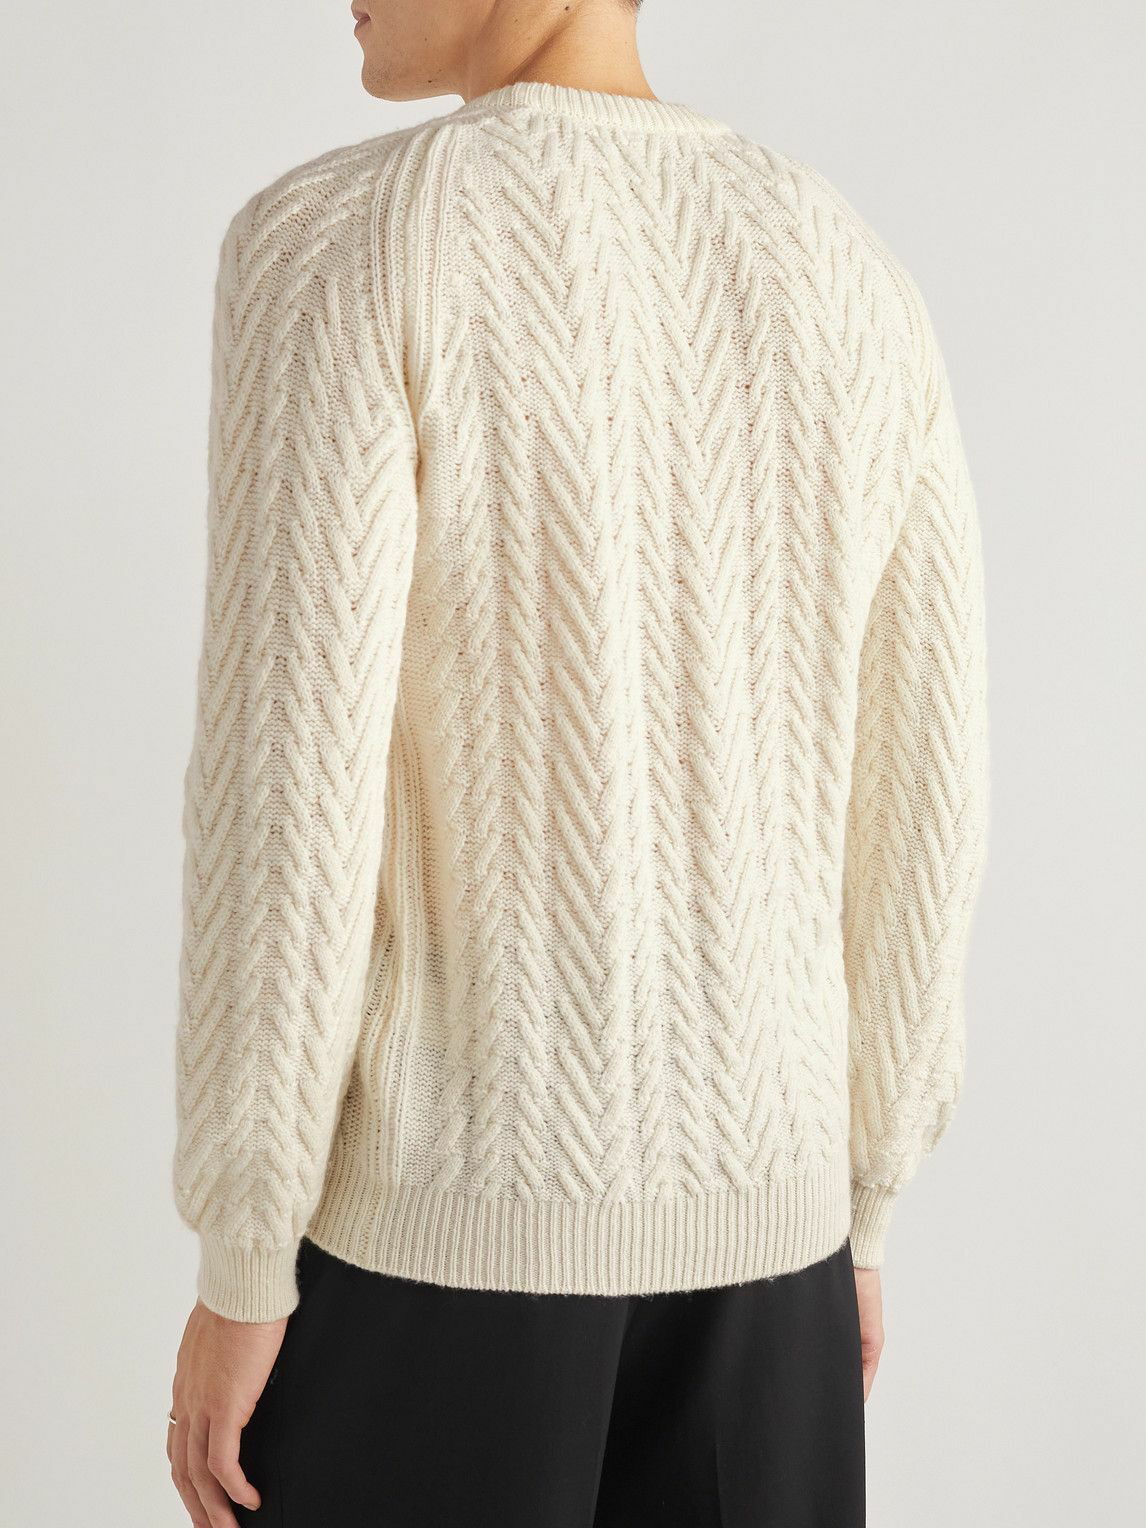 Dunhill - Cable-Knit Cashmere Sweater - White Dunhill